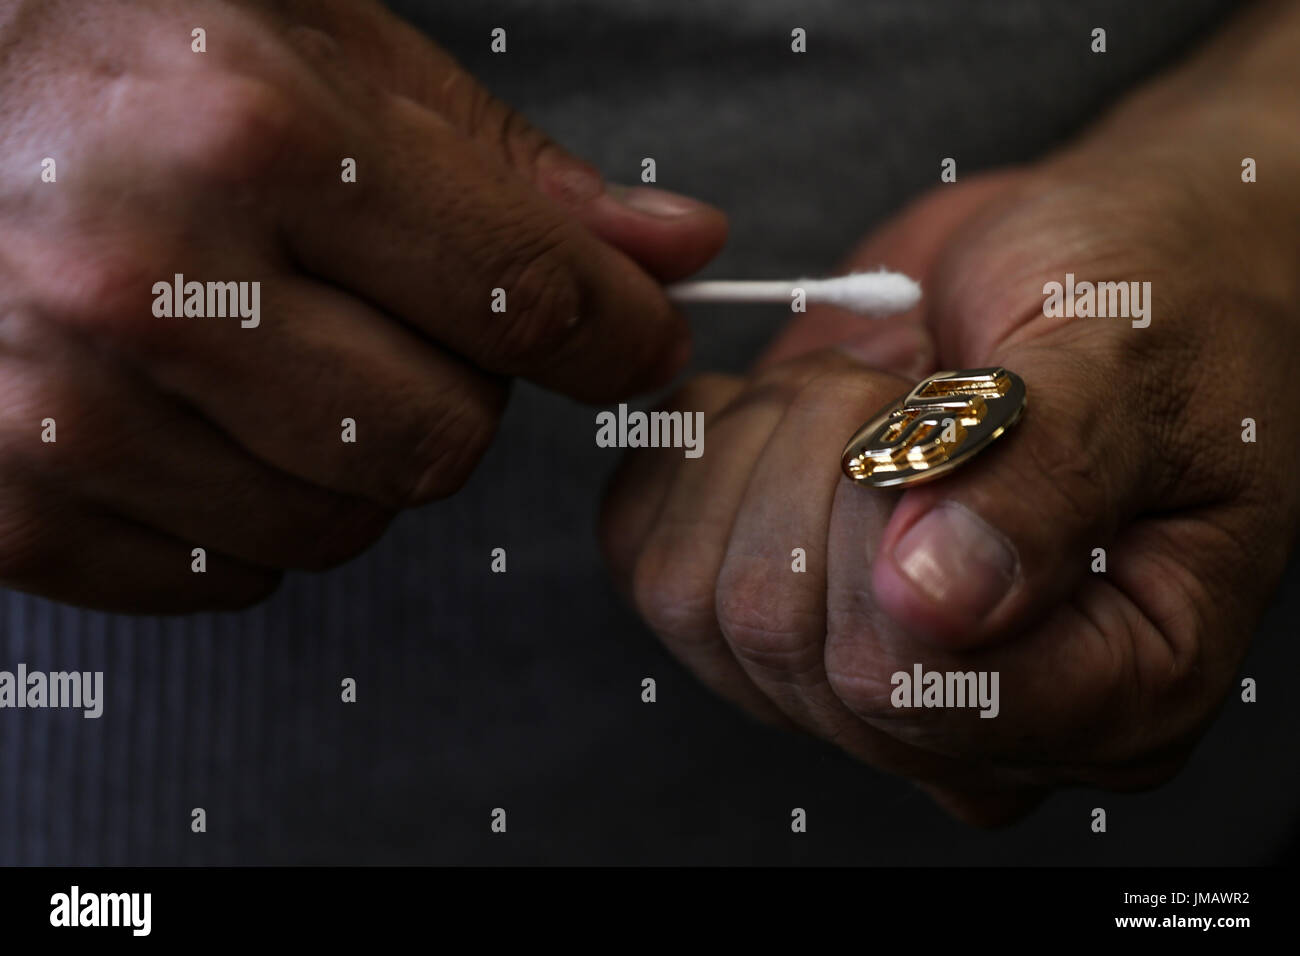 Tijuana, Baja California, Mexico. 7th July, 2017. HECTOR BARAJAS-VARELA, a deported U.S. Army veteran, polishes one of his medals at the Deported Veterans Support House in Tijuana, Baja California, Mexico. Credit: Joel Angel Juarez/ZUMA Wire/Alamy Live News Stock Photo